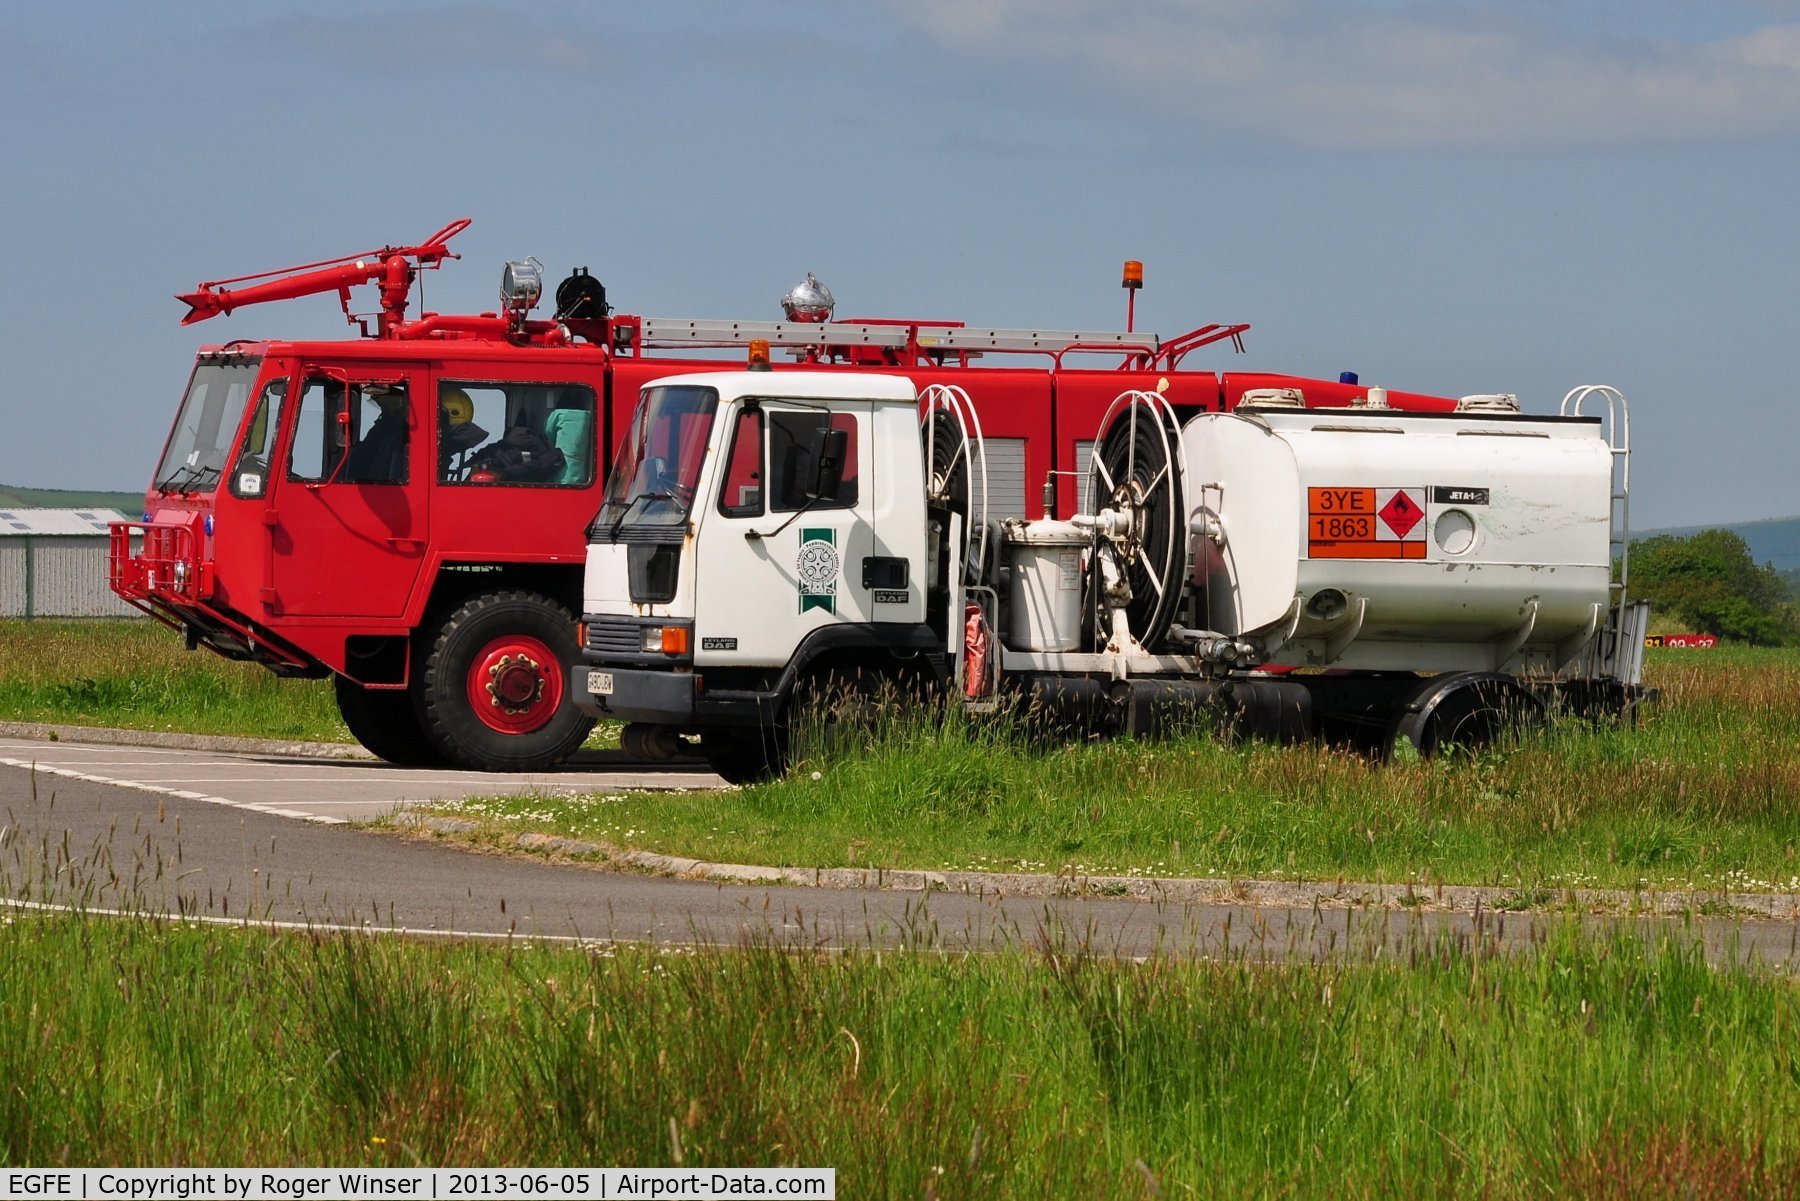 Haverfordwest Aerodrome Airport, Haverfordwest, Wales United Kingdom (EGFE) - Haverfordwest Airport Fire and Rescue tender and aviation fuel tanker.